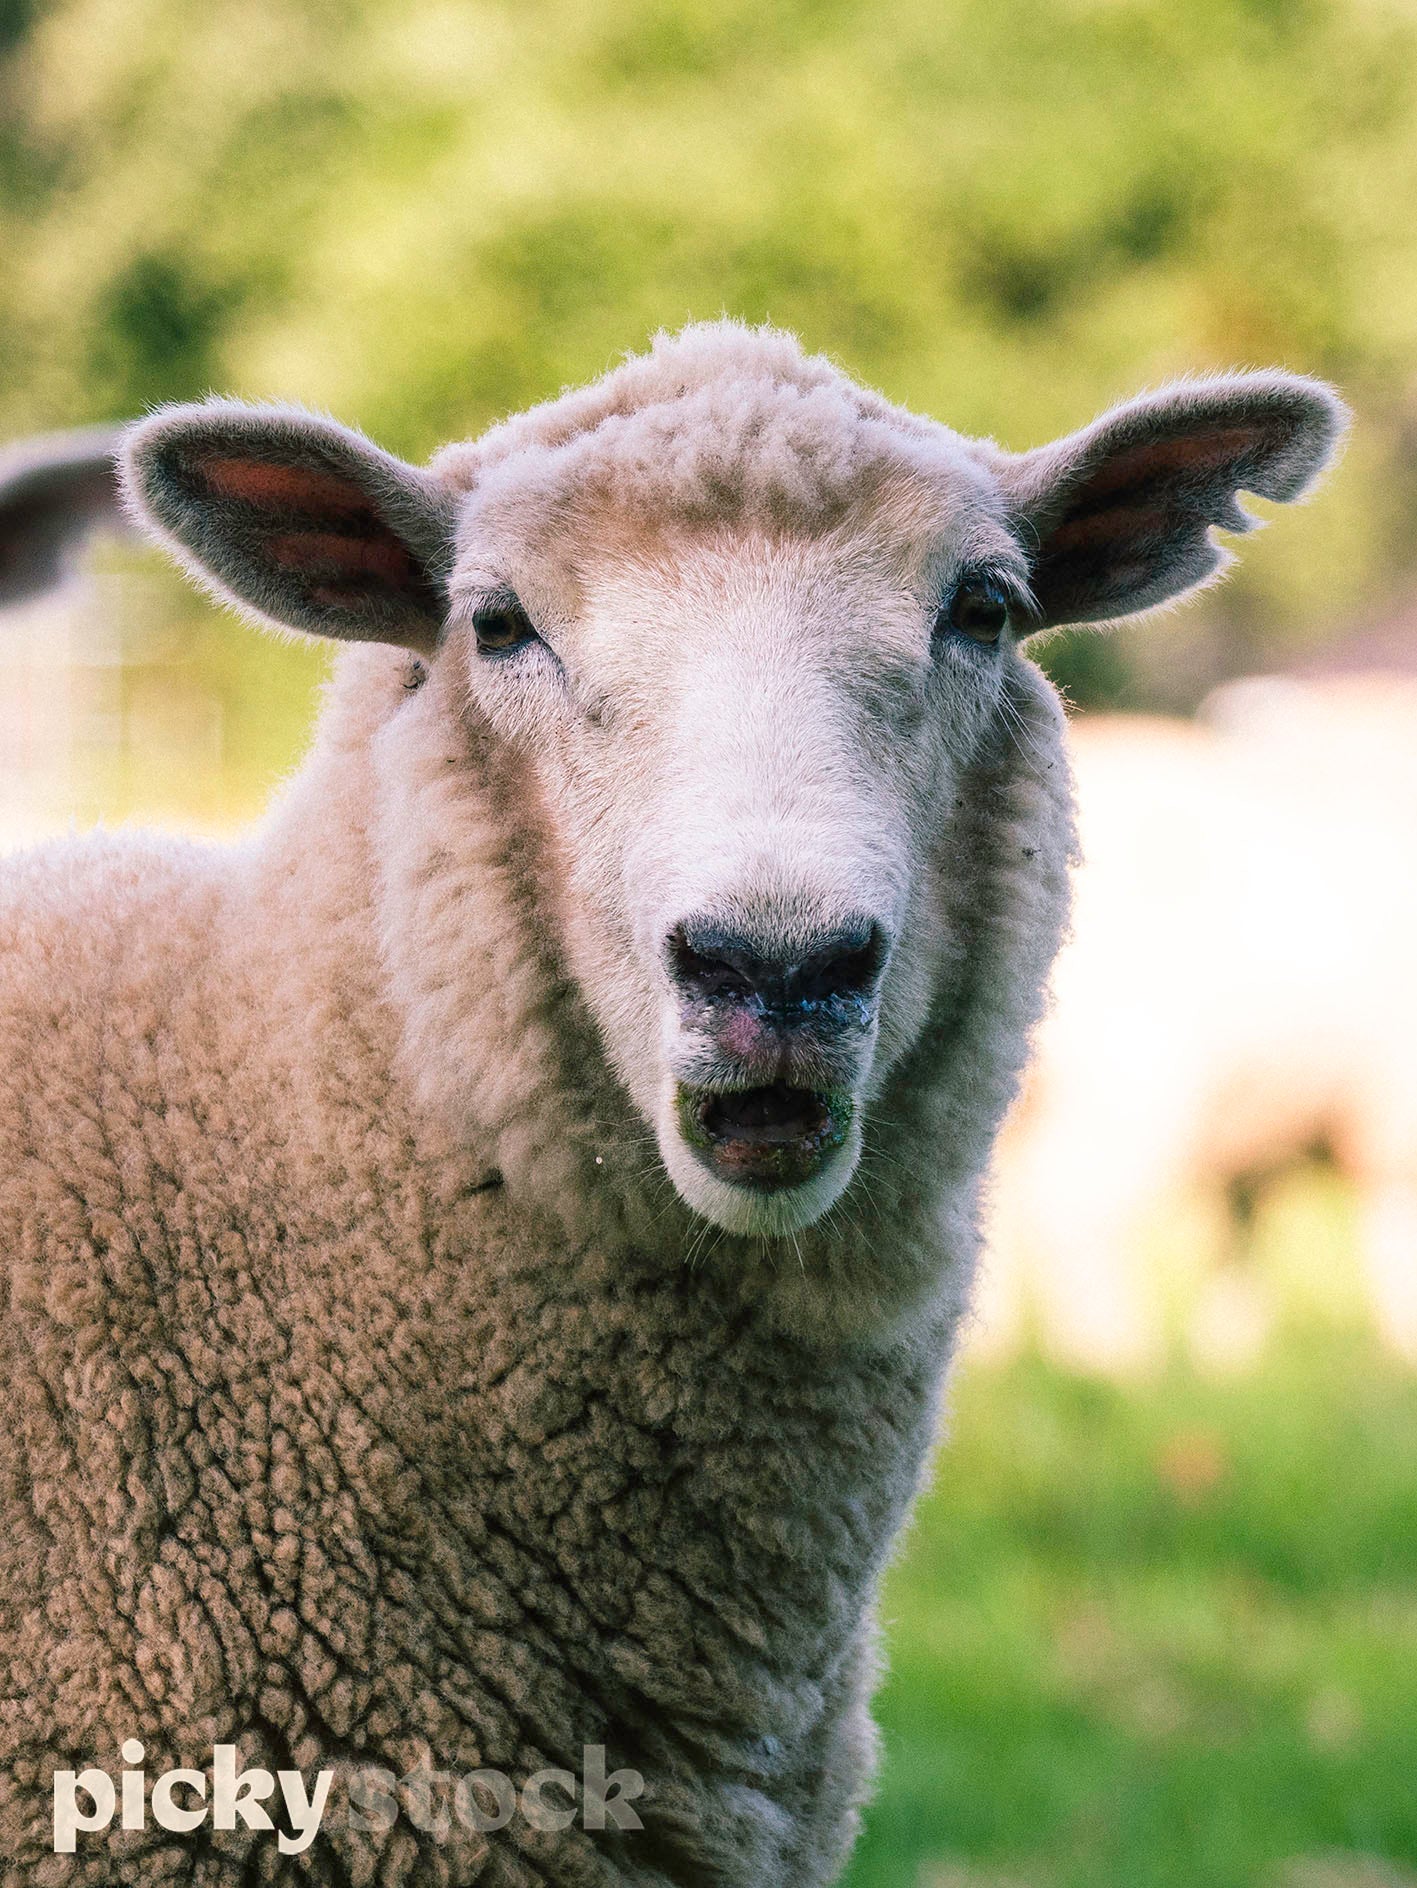 Sheep looking directly to camera. Green in background. Shallow depth of field.